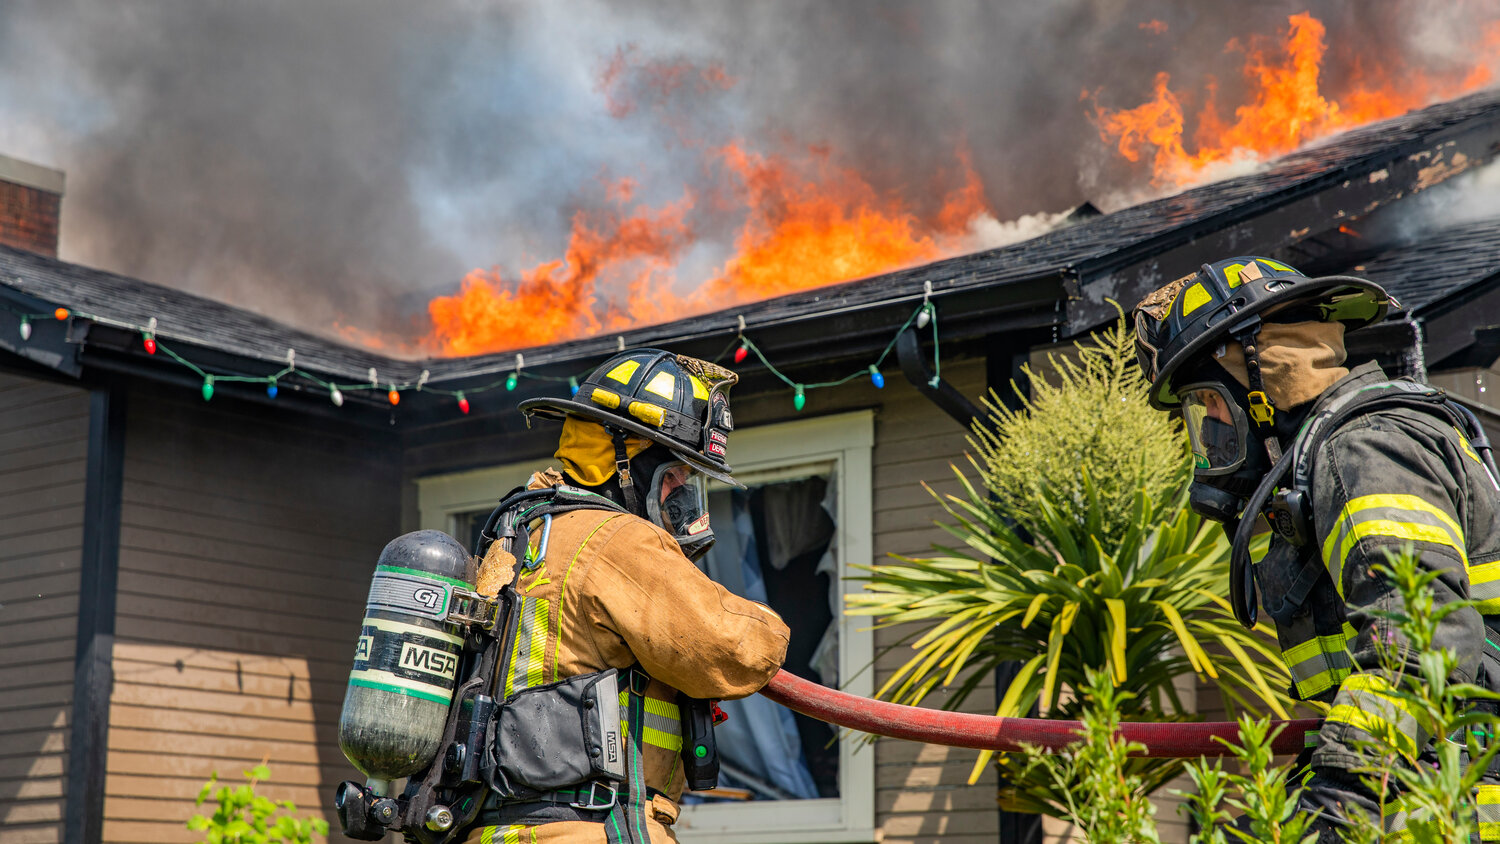 Lewis County and Riverside firefighters carry hoses and work to put out flames at a residence in the 800 block of Centralia College Blvd. on Wednesday, May 24.